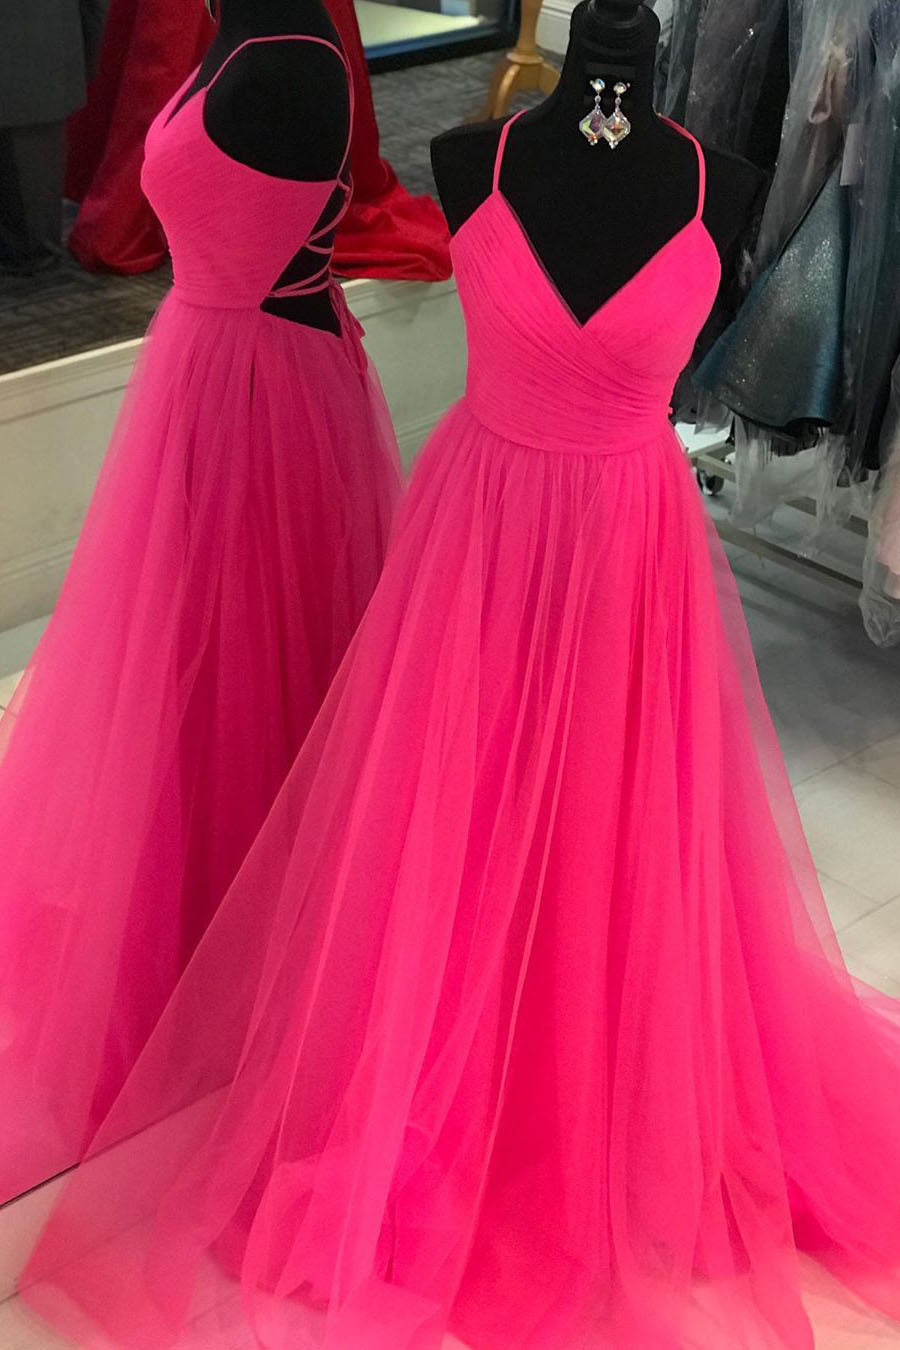 Party Dress Shop, V Neck A-line Hot Pink Long Tulle Prom Graduation Dress with Lace-up Back